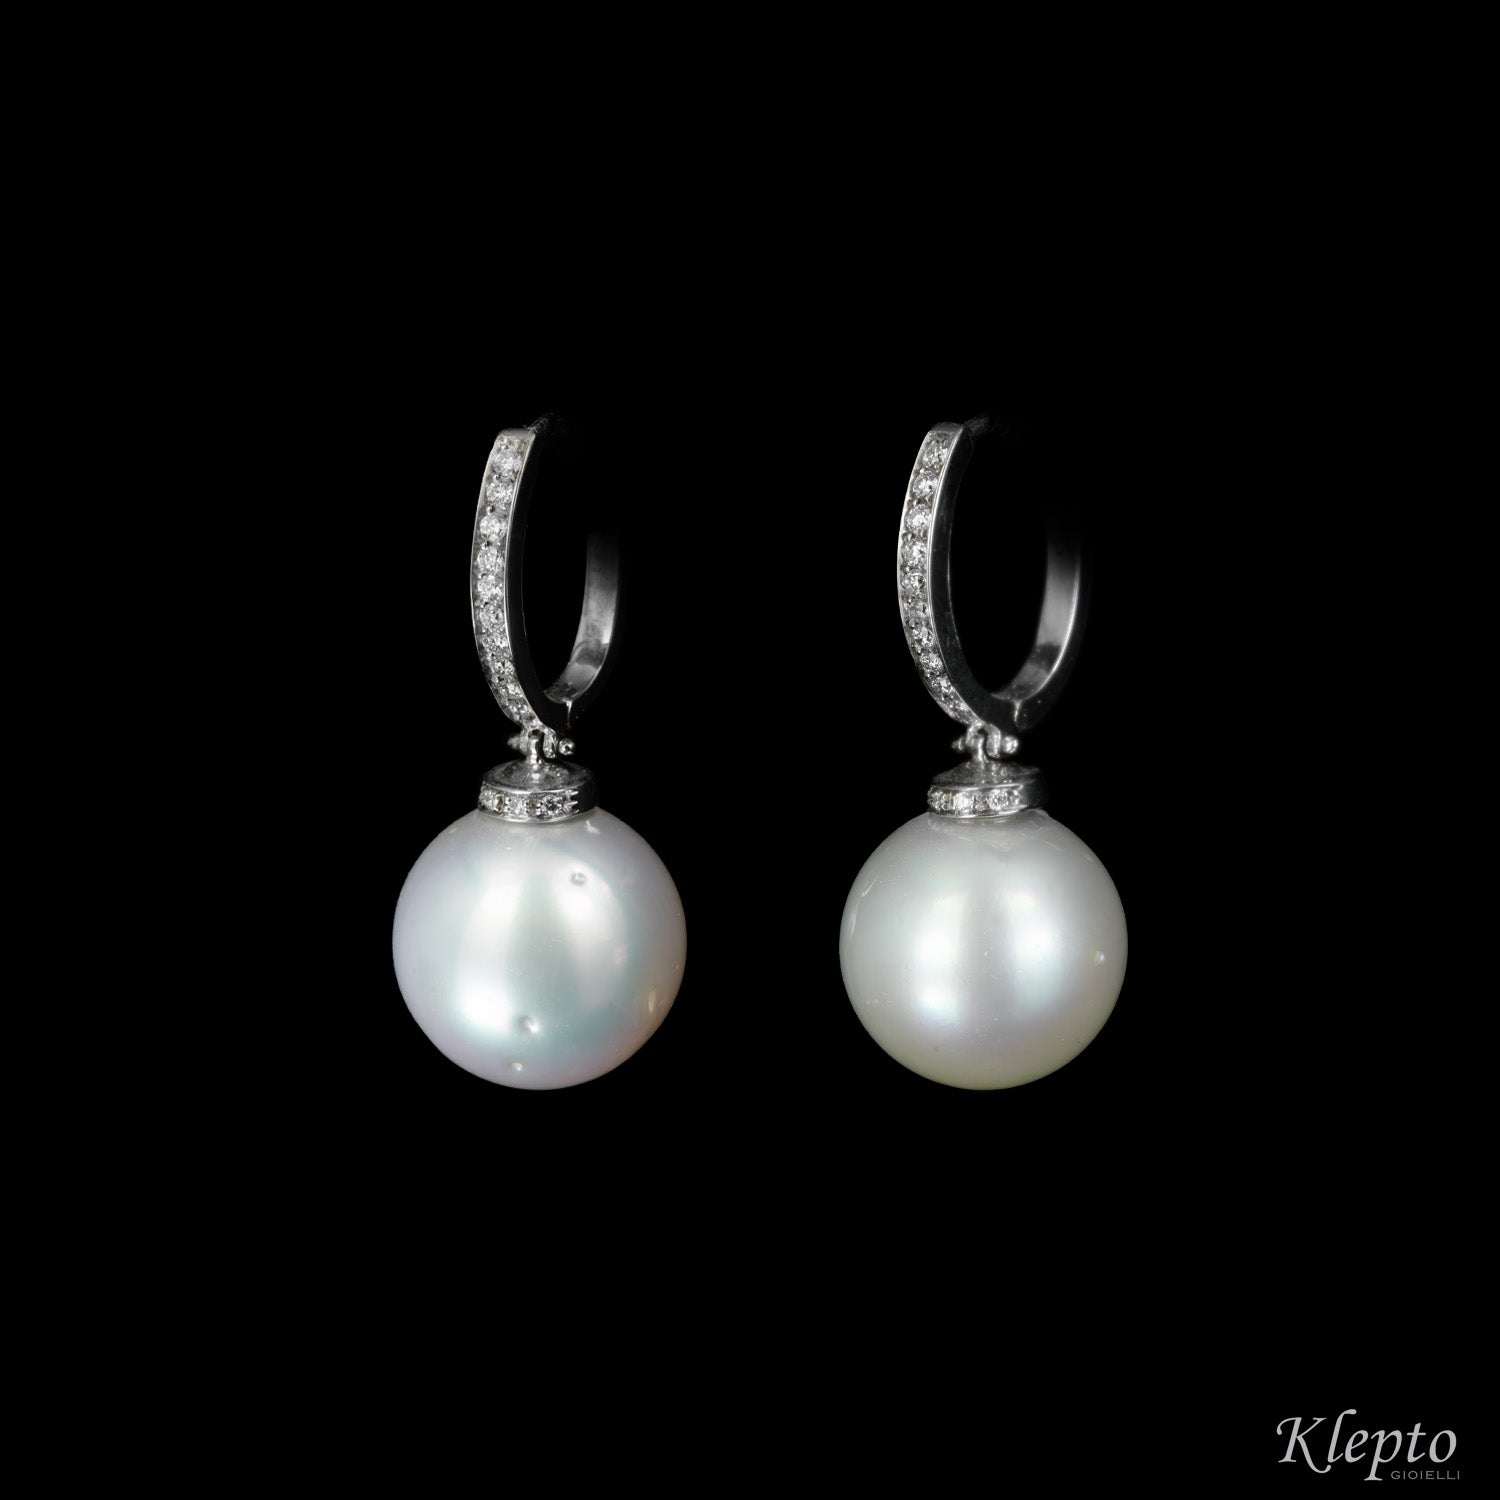 White gold pendant earrings with Australian Pearls and Diamonds